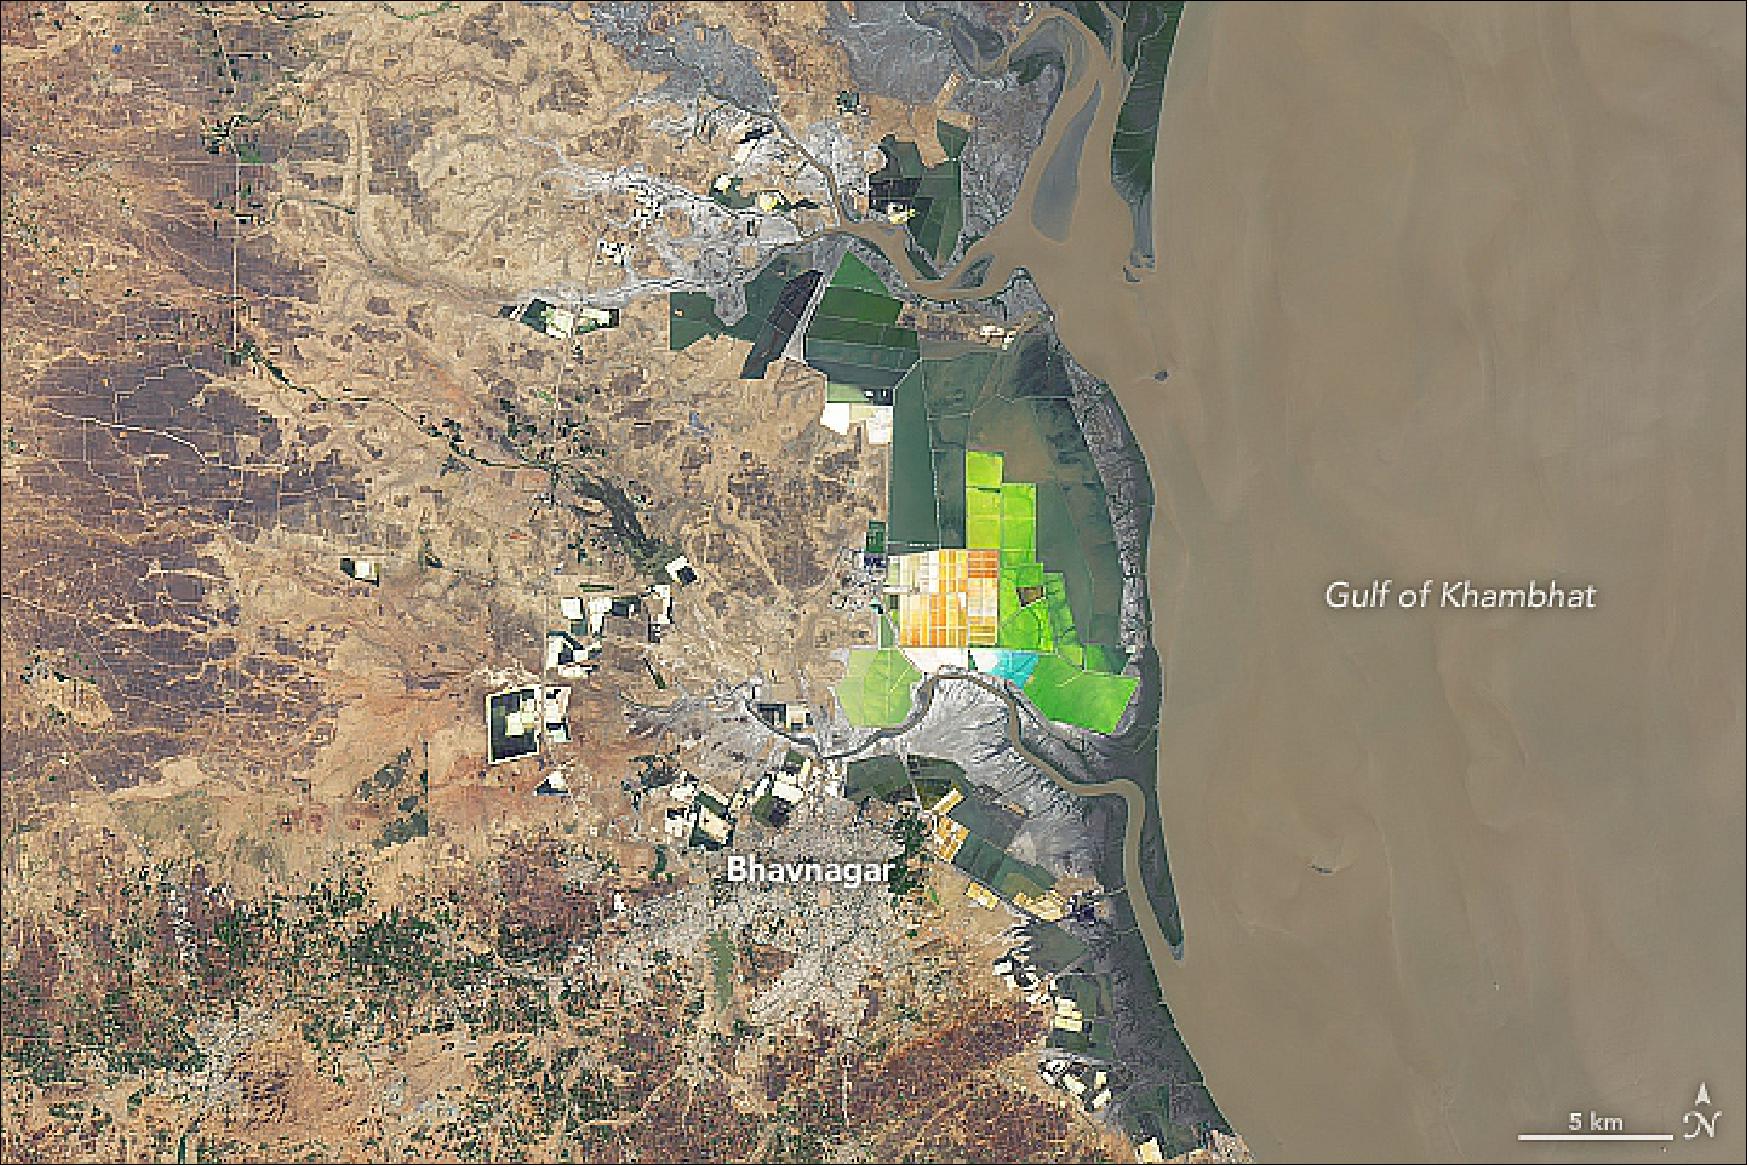 Figure 25: The images of Figures 25 and 26 show the city of Bhavnagar, which is located in one of the major salt-producing districts in the state. They were acquired on February 28, 2019, by OLI on Landsat-8. The colorful rectangles are salt evaporation ponds and often seen in major salt-producing areas, such as the Makgadikgadi Pan in Botswana (image credit: NASA Earth Observatory images by Lauren Dauphin, using Landsat data from the U.S. Geological Survey. Story by Kasha Patel)